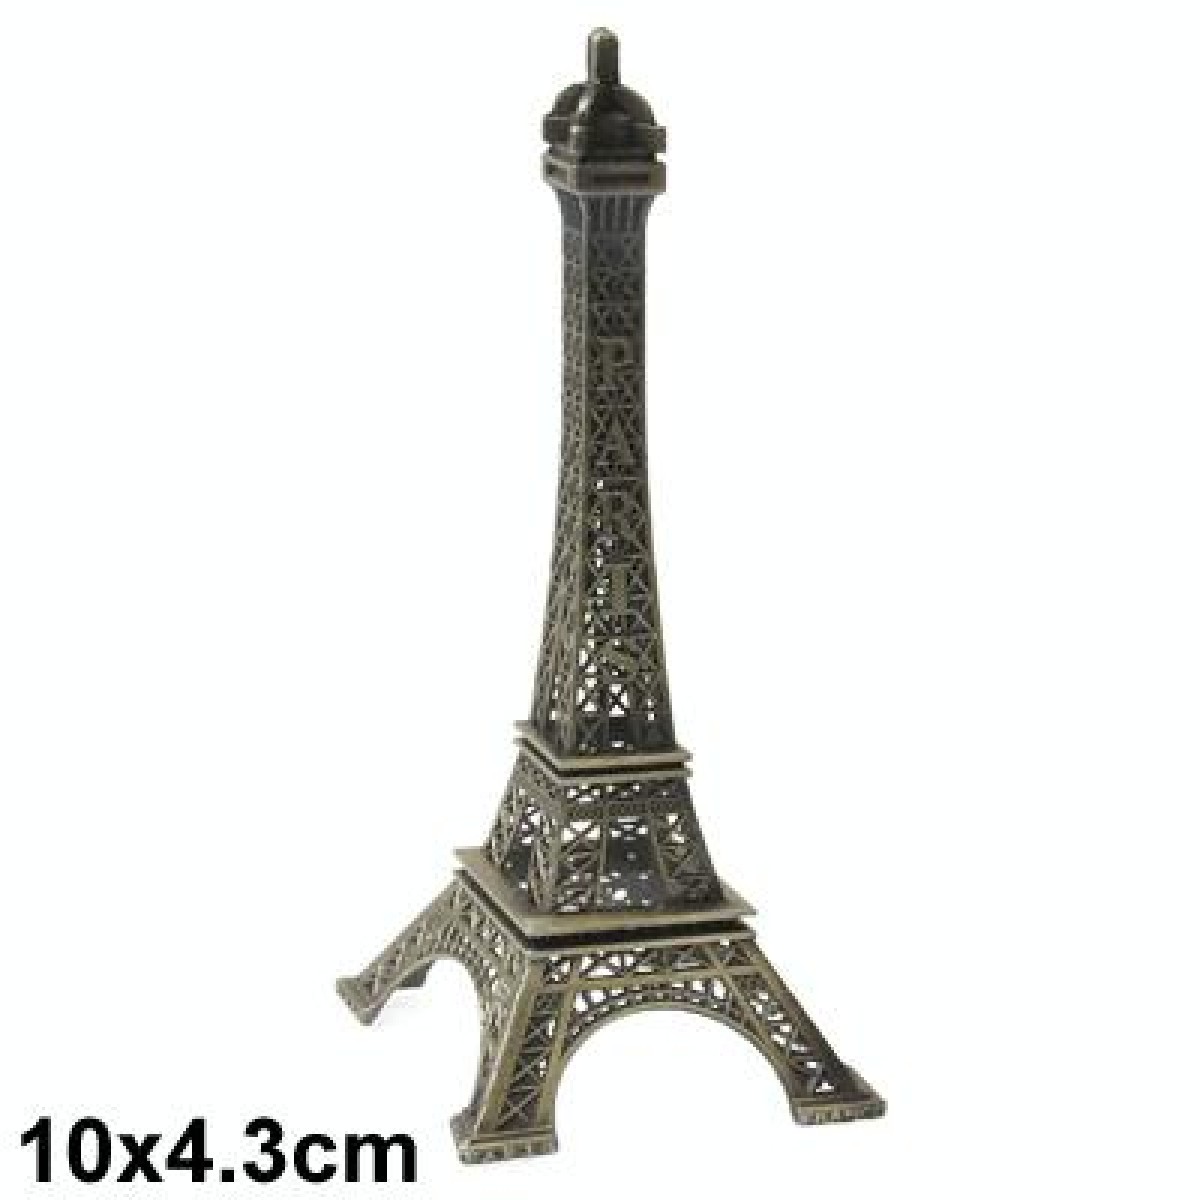 Paris Eiffel Tower Furnishing Articles Model Photography Props Creative Household Gift (Size:10 x 4.3cm )